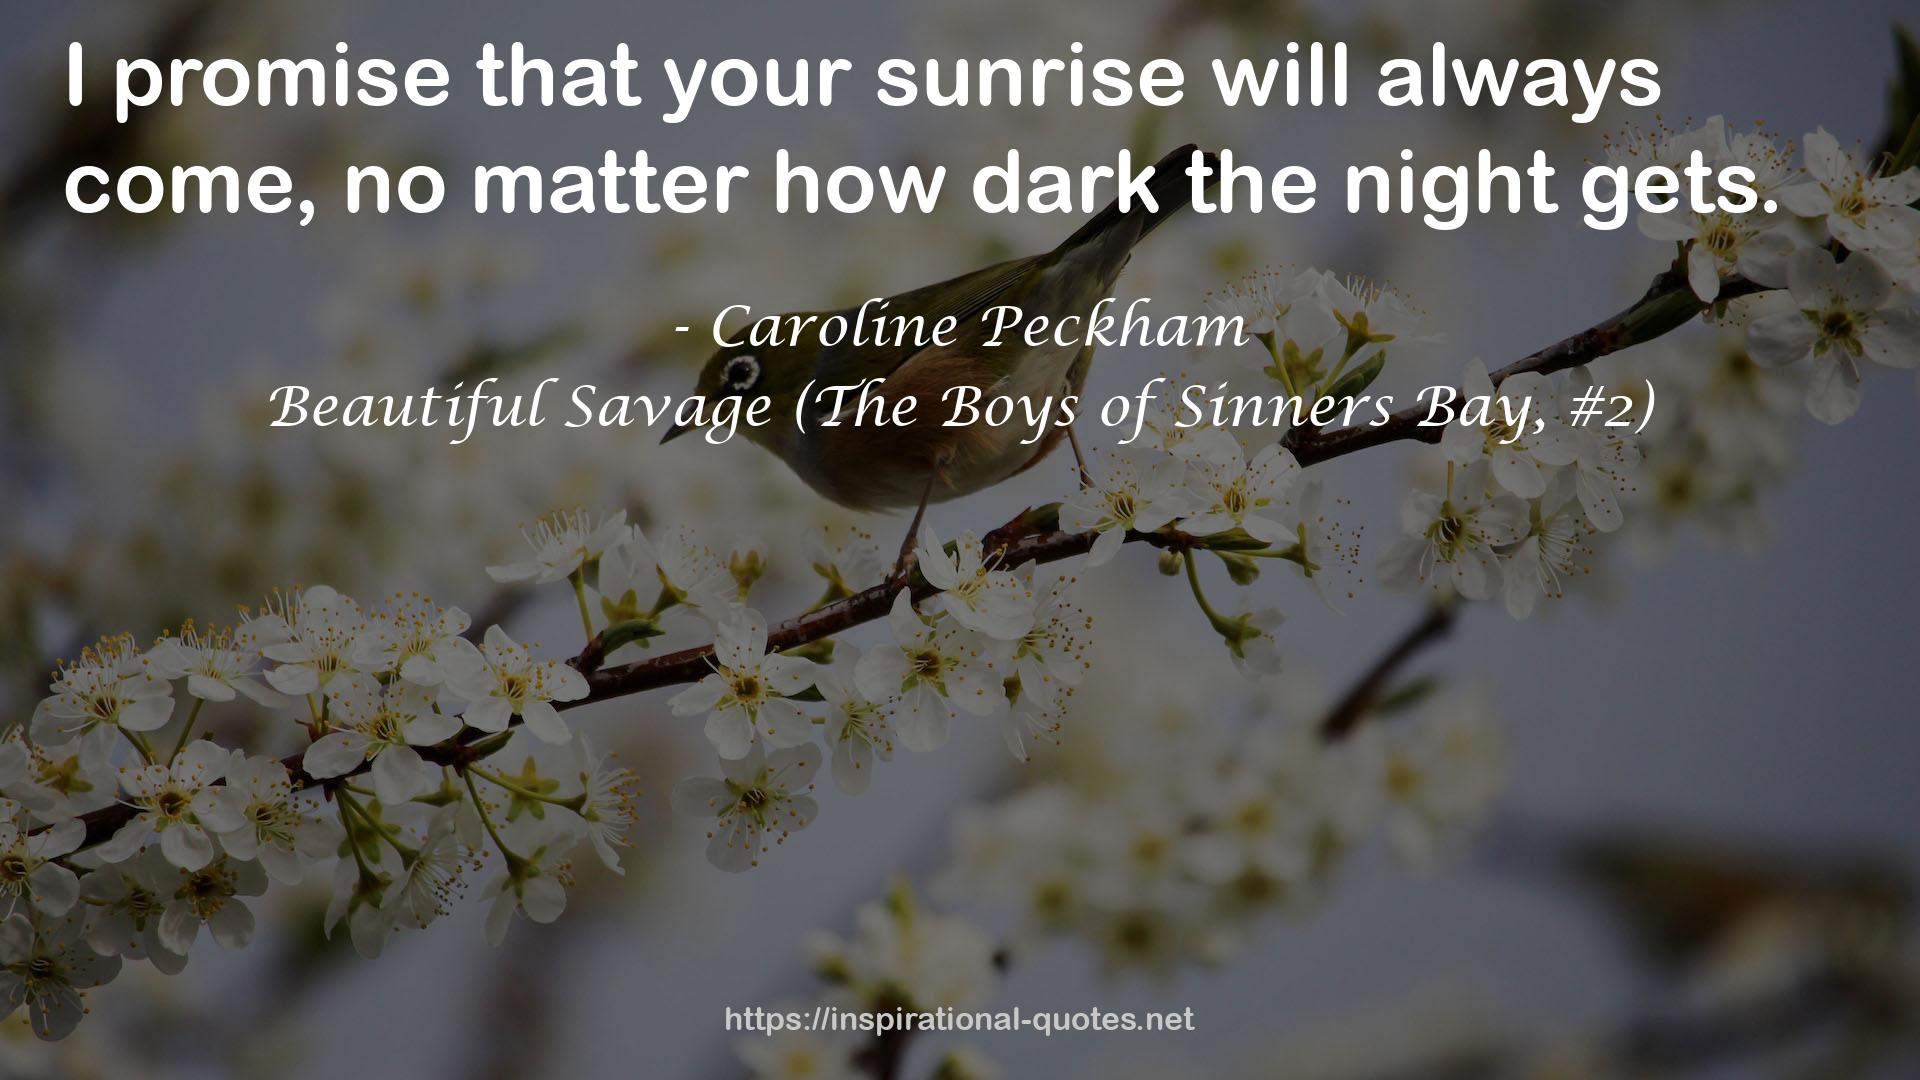 Beautiful Savage (The Boys of Sinners Bay, #2) QUOTES